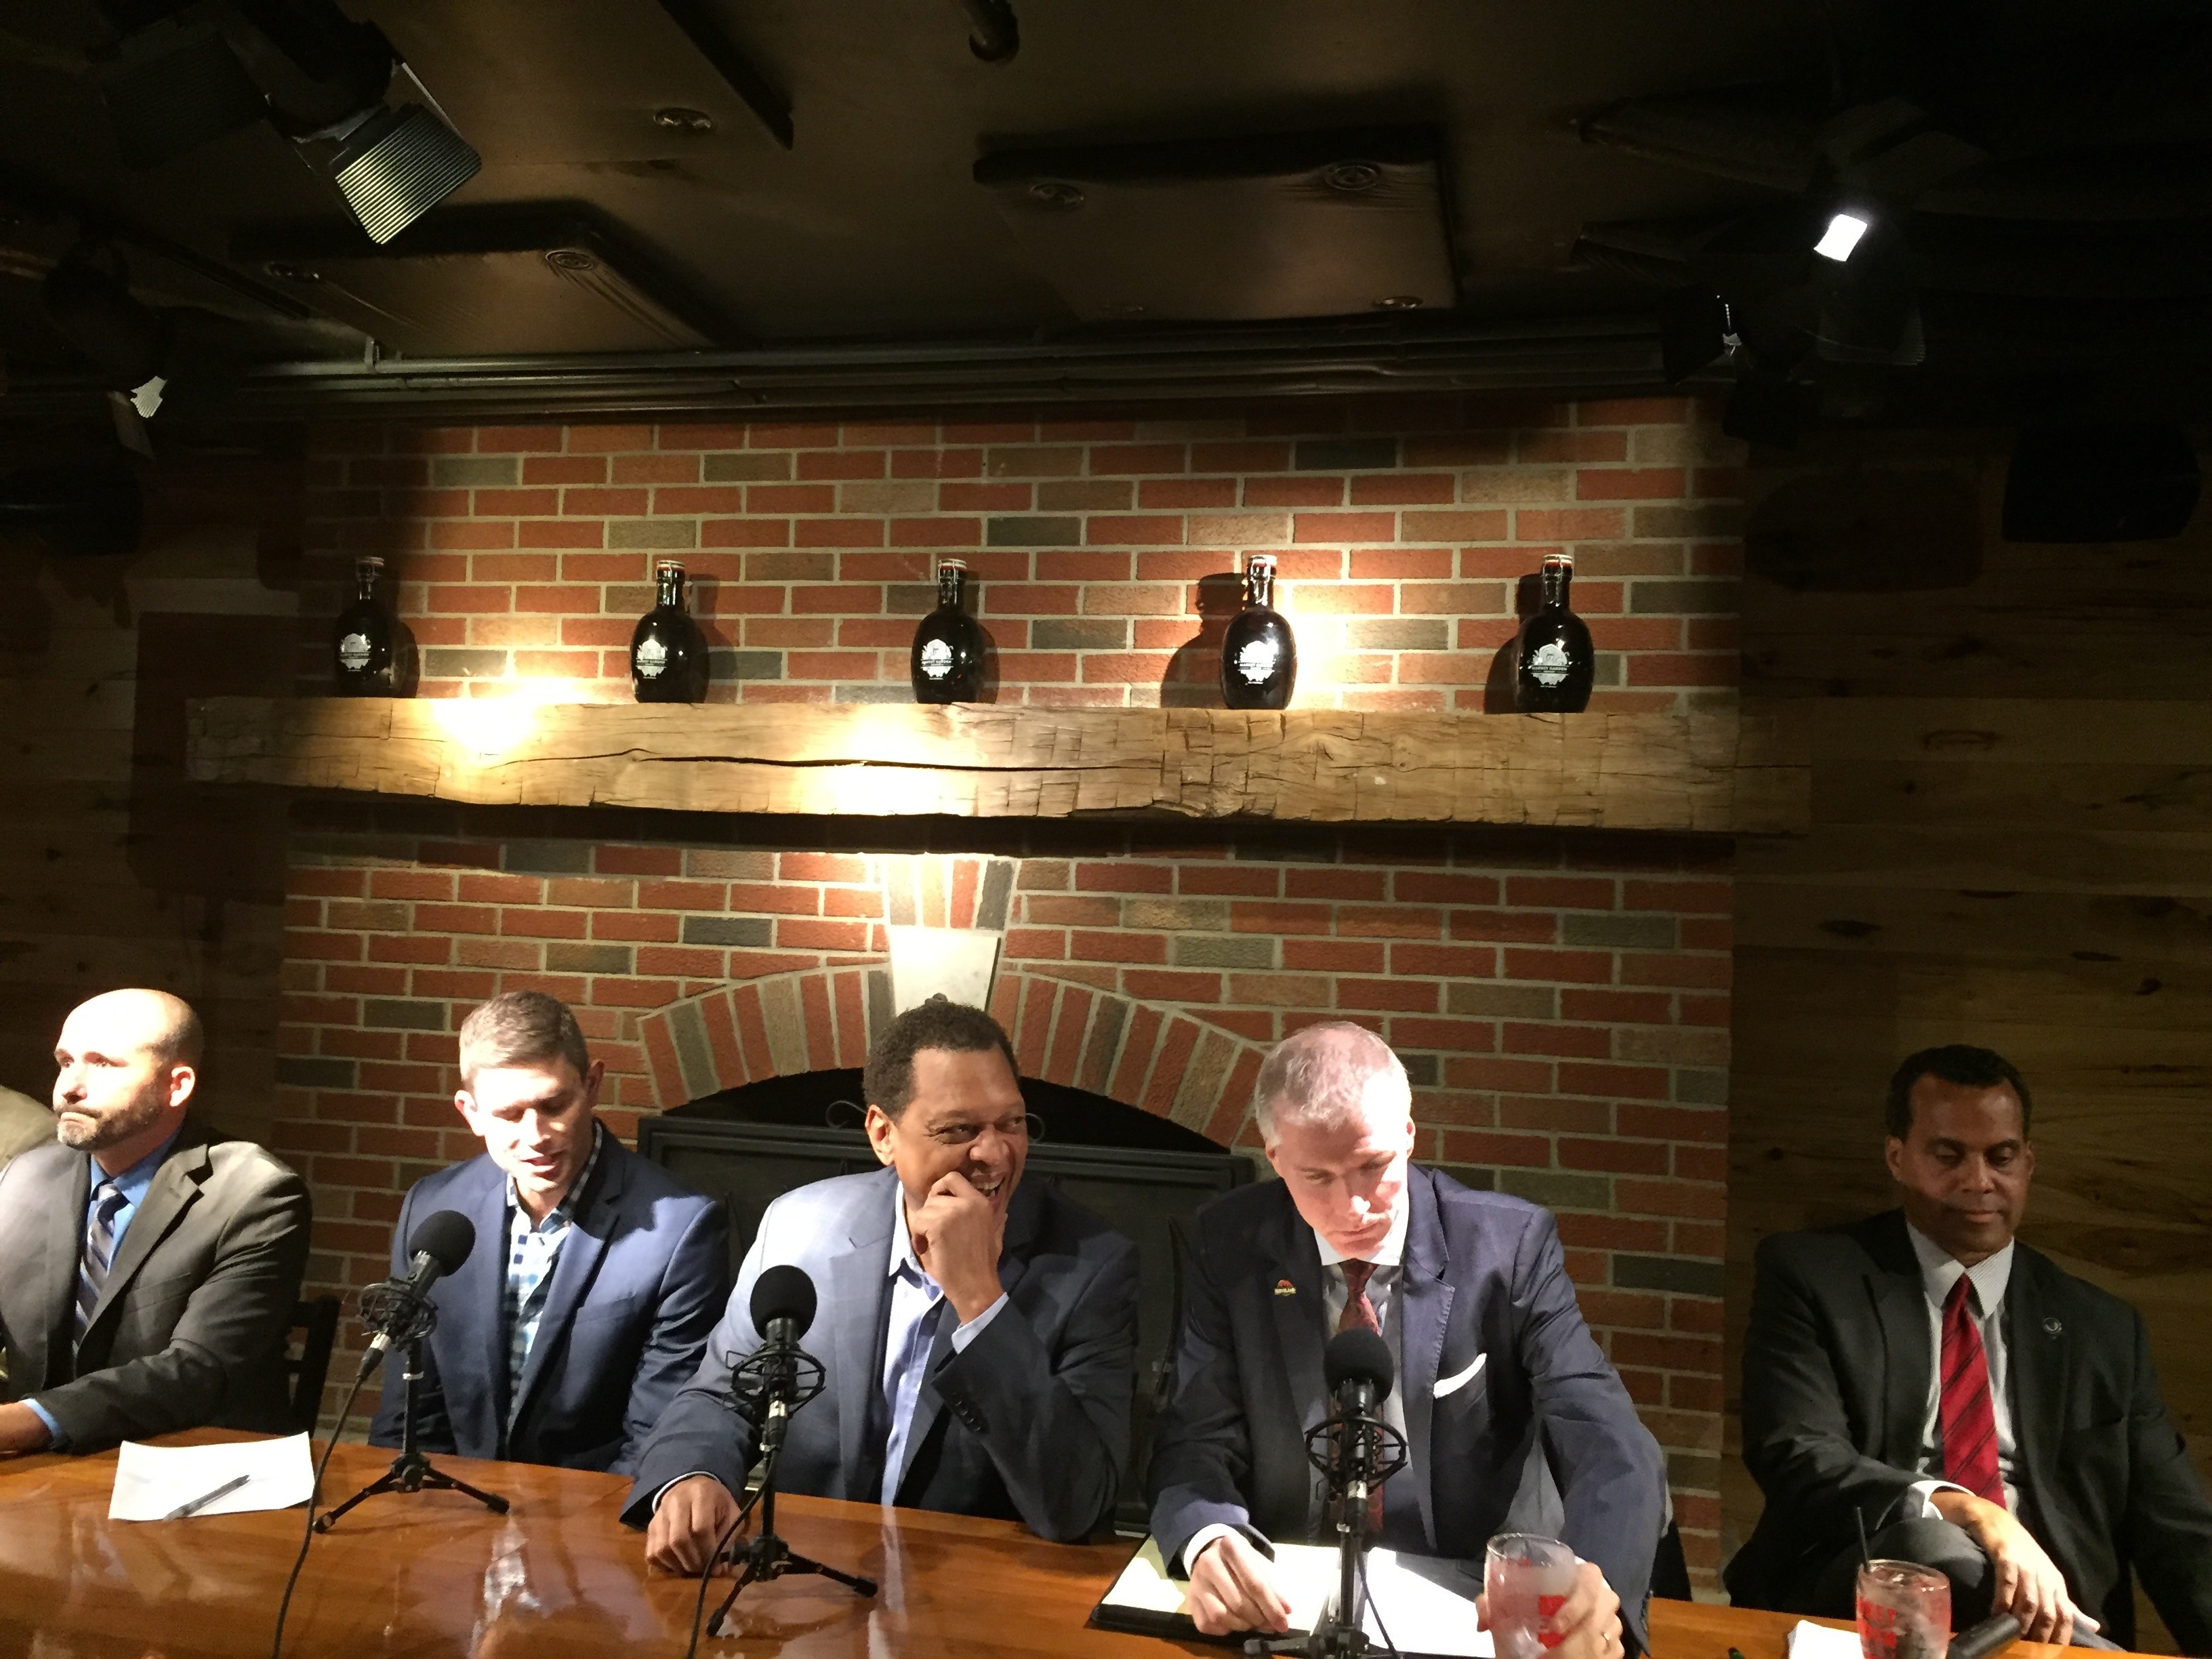 All Three White Cleveland Mayoral Candidates Grilled About Trump